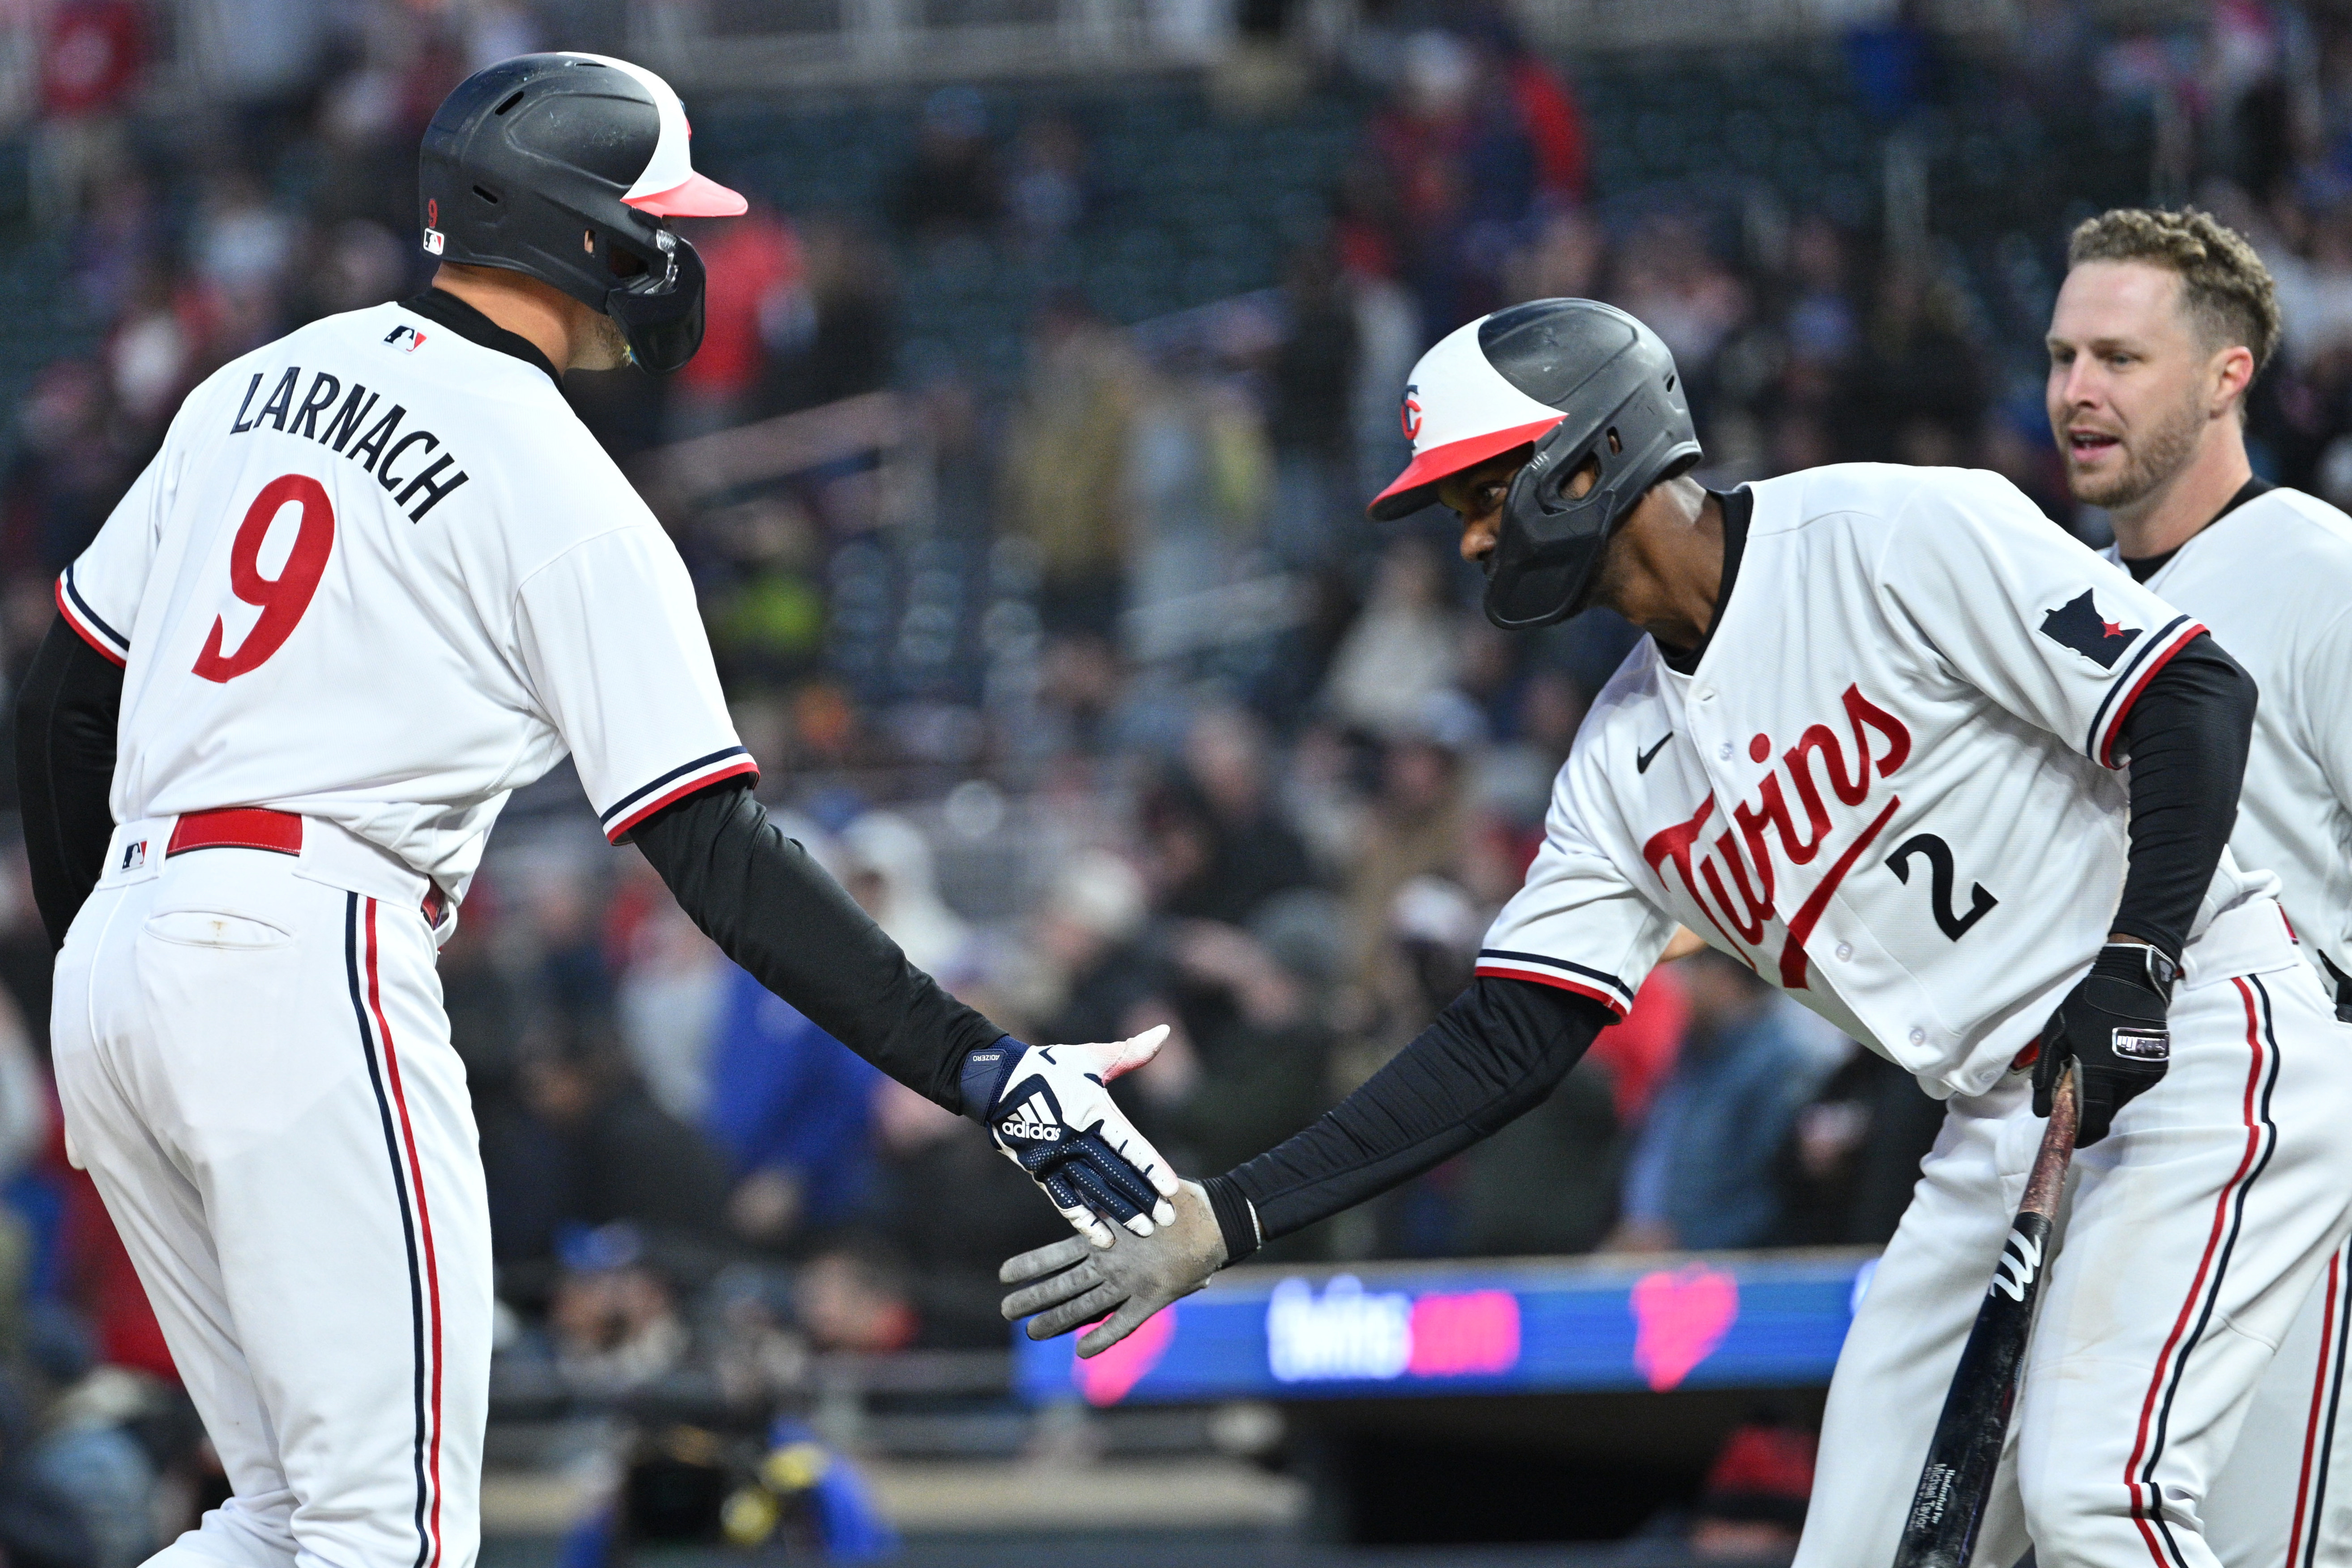 Twins top Yankees 6-2, clinch season series for first time since 2001